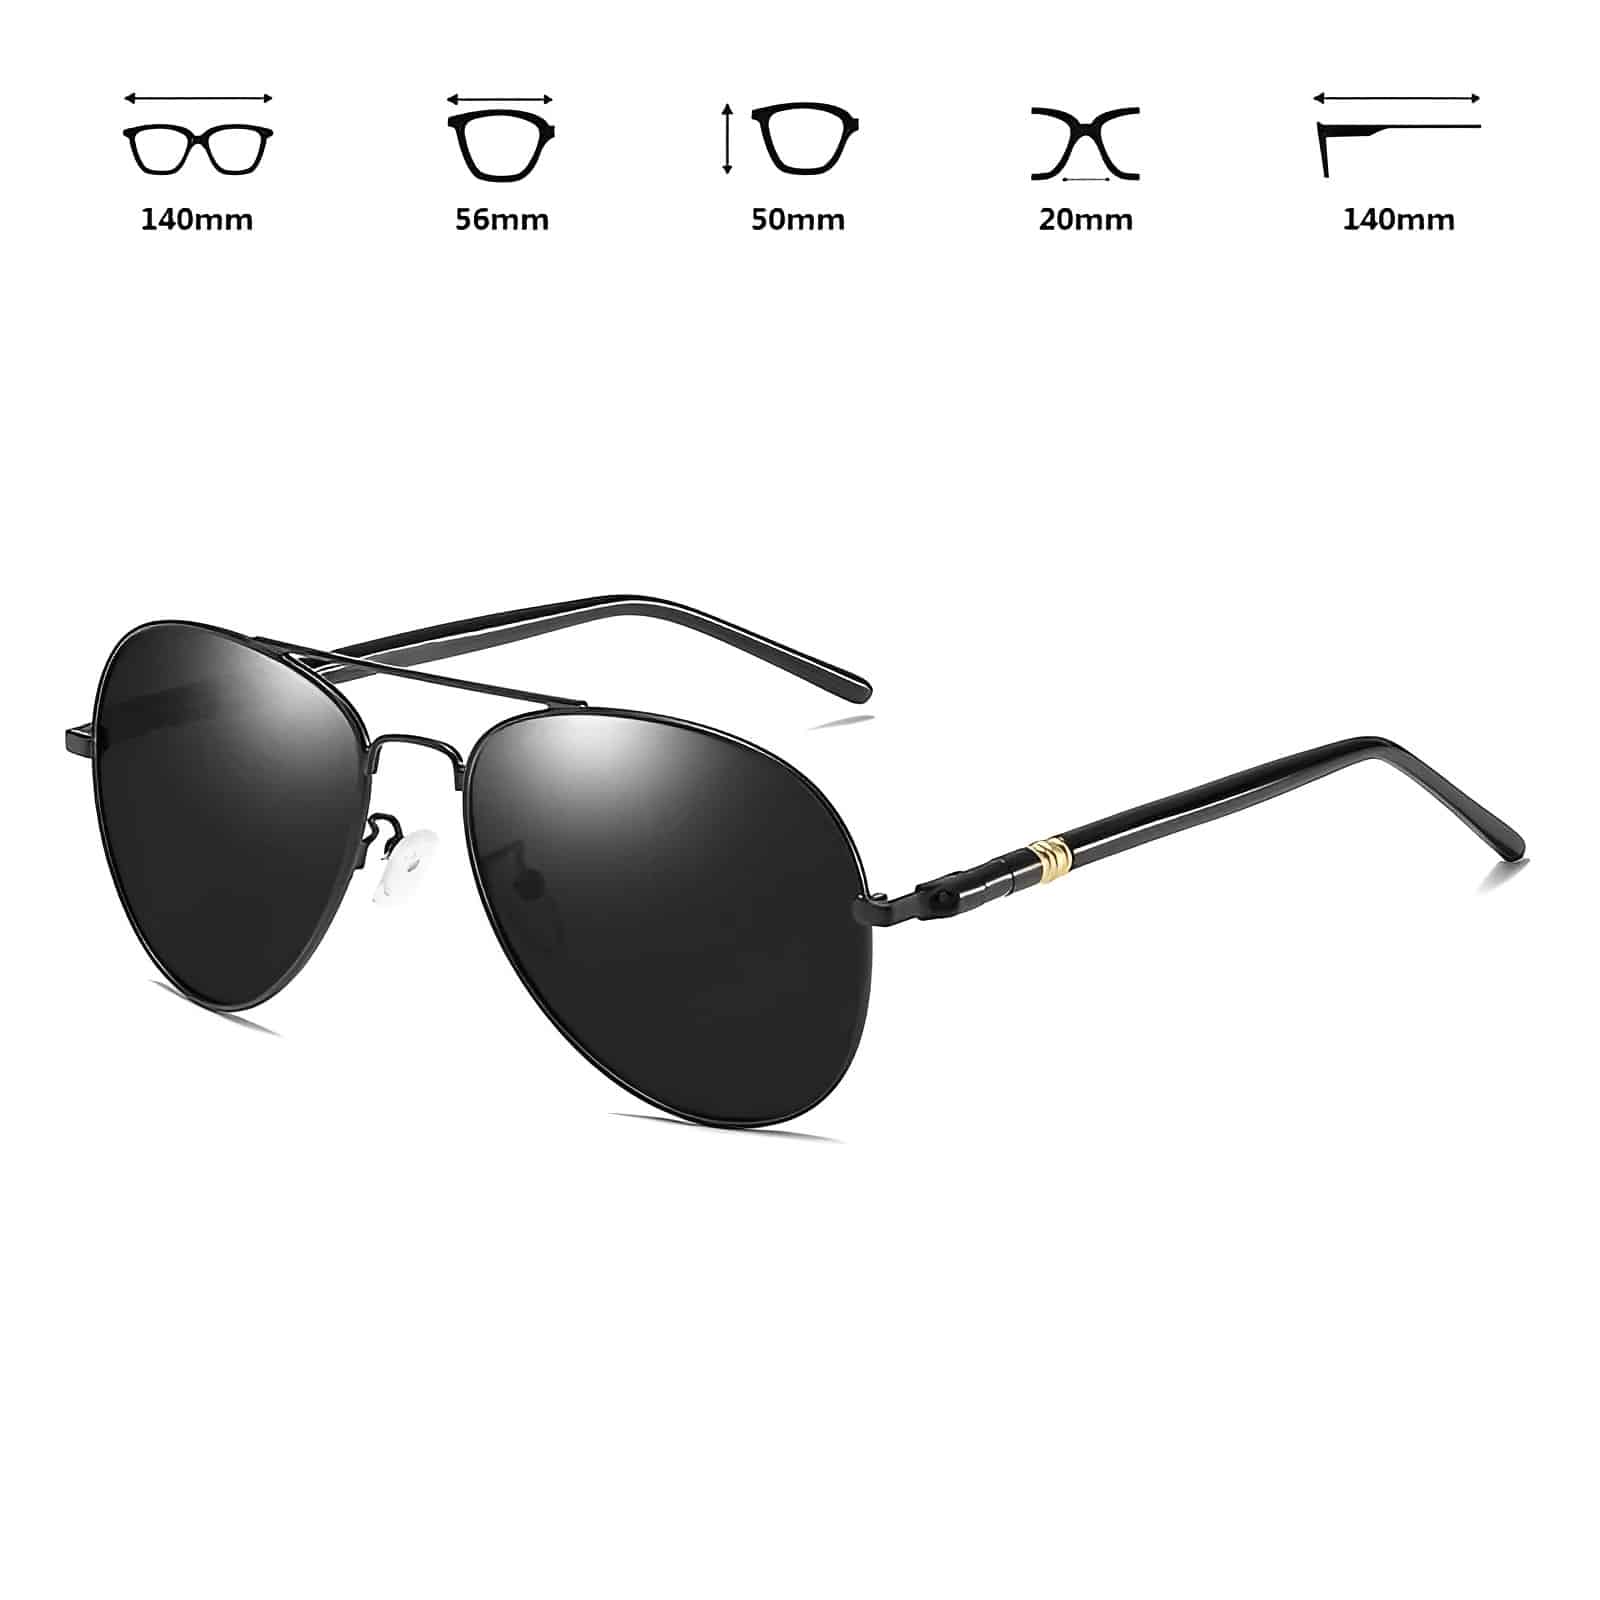 This Aviator Polarized Sunglasses with high-definition vision polarized lens filters and block sunlight reflection glares effectively.